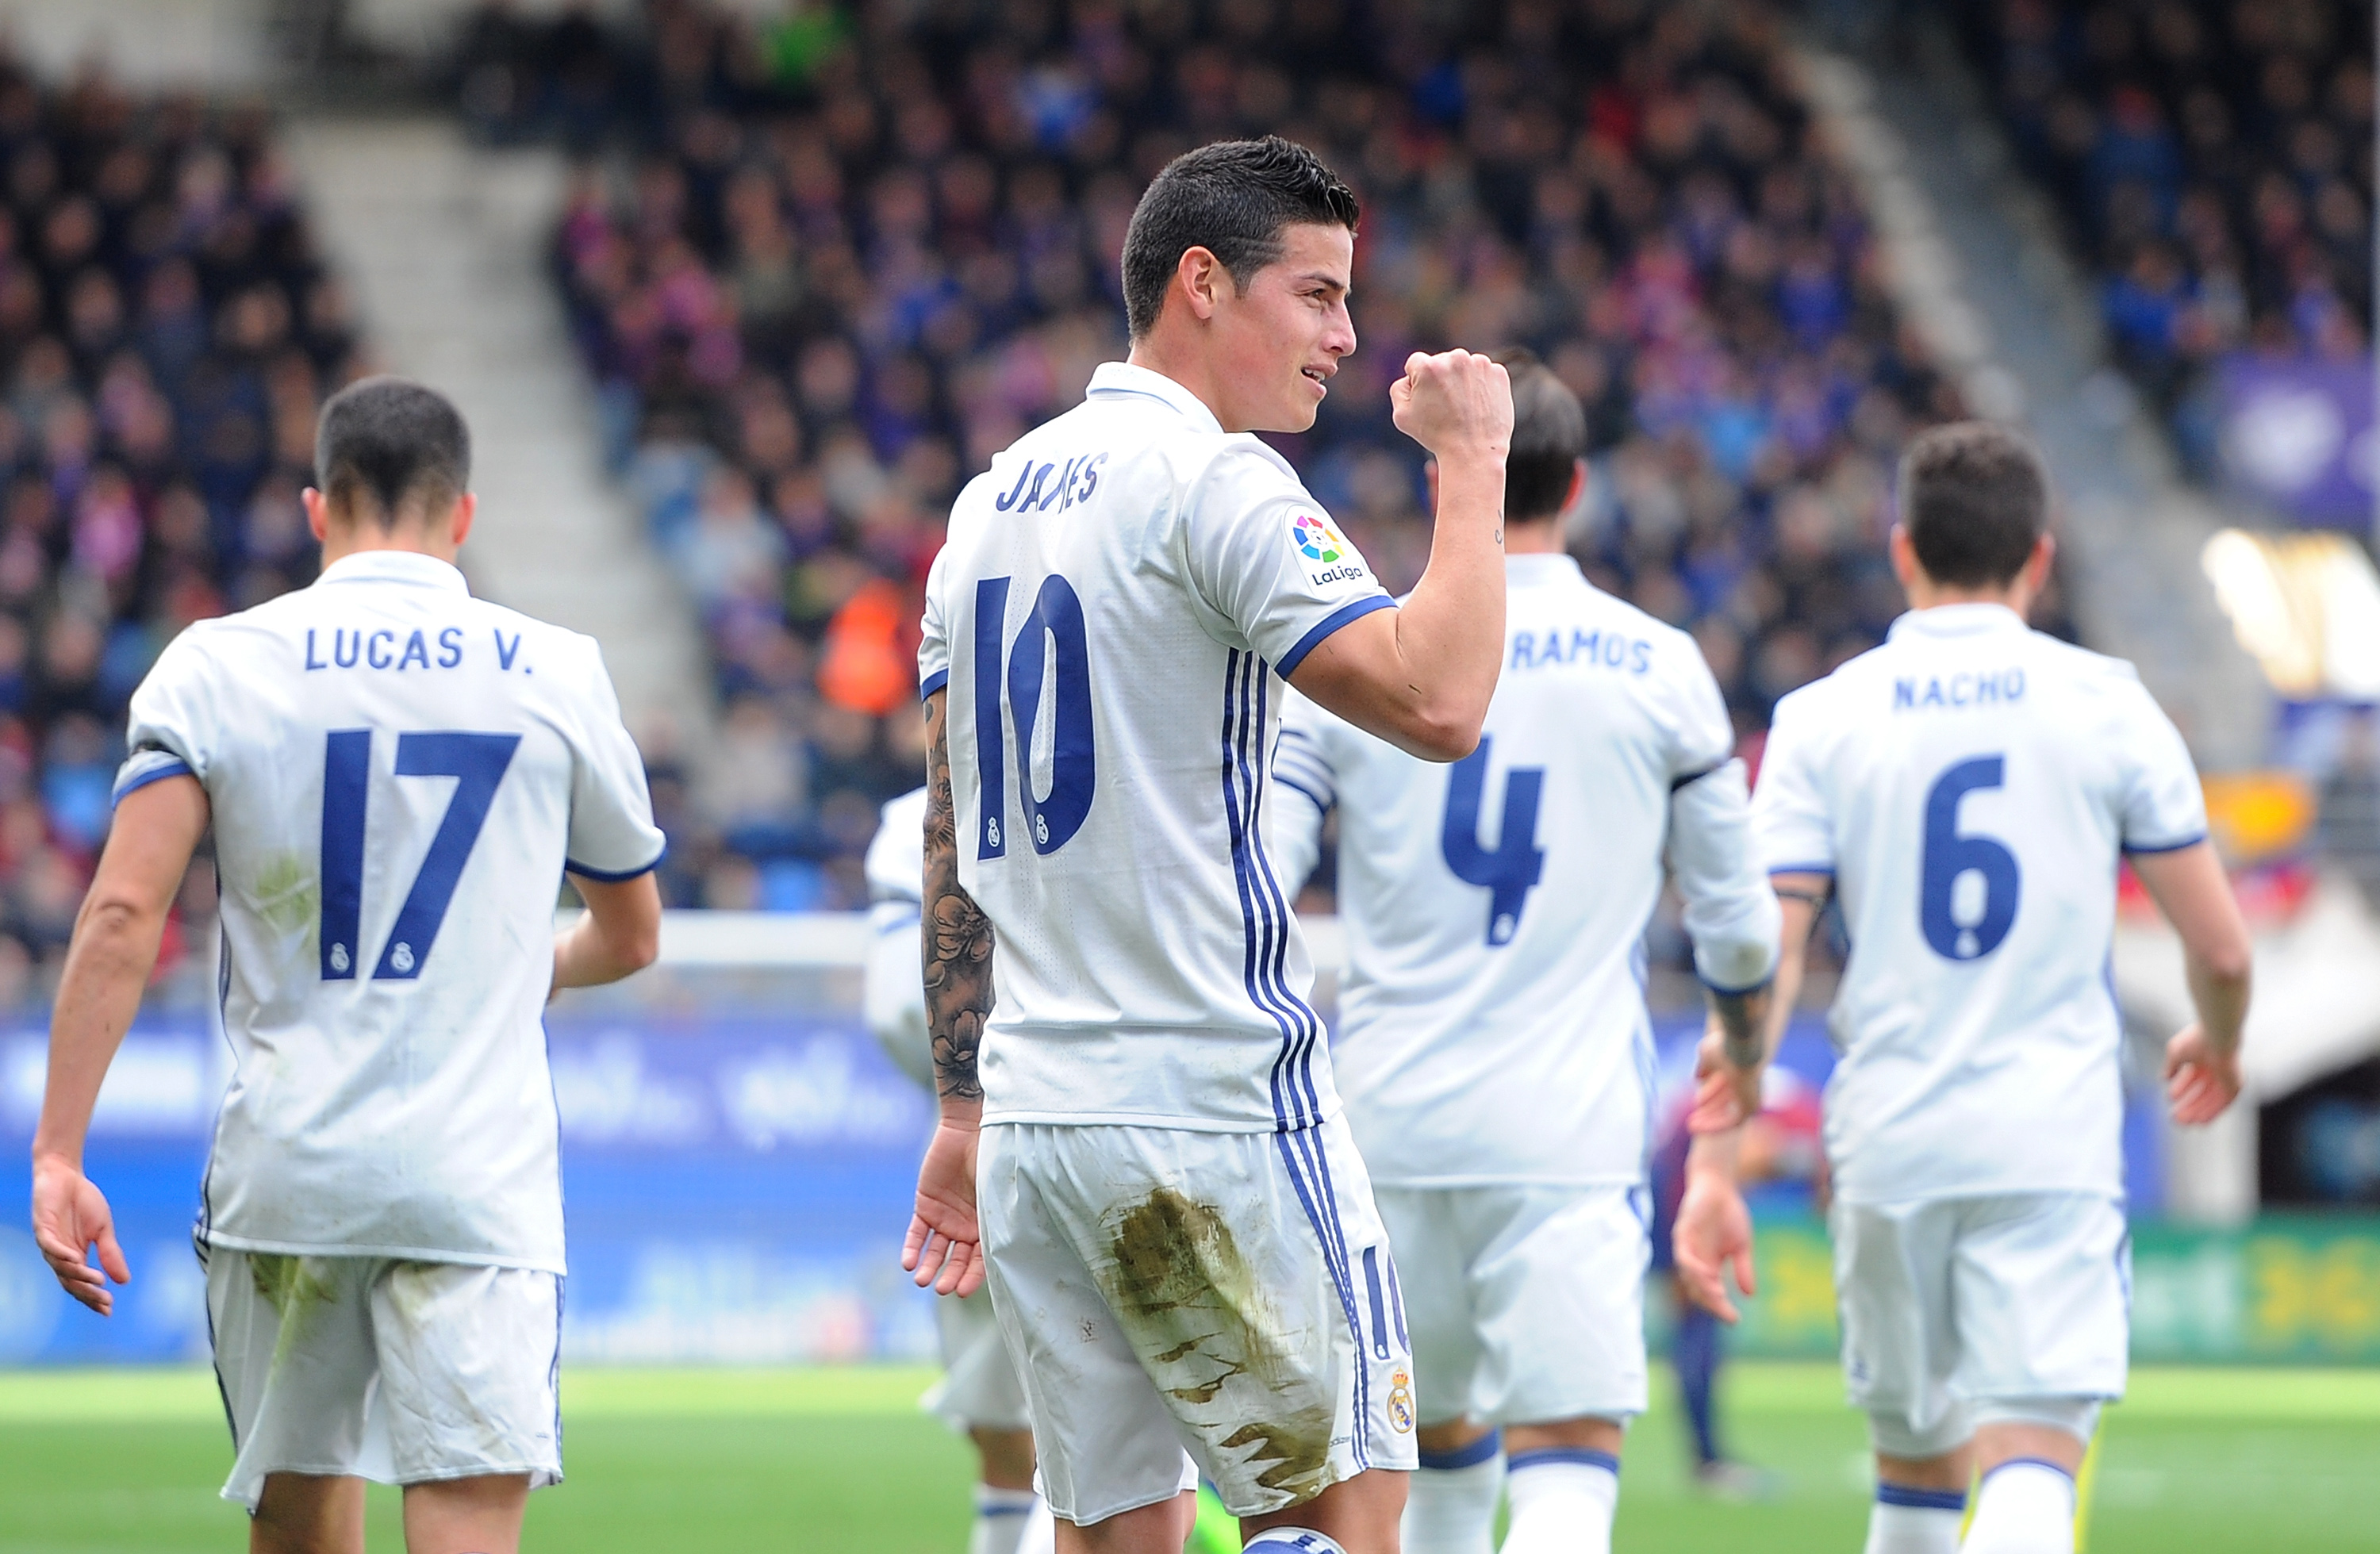 EIBAR, SPAIN - MARCH 04:  James Rodriguez of Real Madrid celebrates after scoring Real's 3rd goal during the La Liga match between SD Eibar and Real Madrid CF at Estadio Municipal de Ipurua on March 4, 2017 in Eibar, Spain.  (Photo by Denis Doyle/Getty Images)